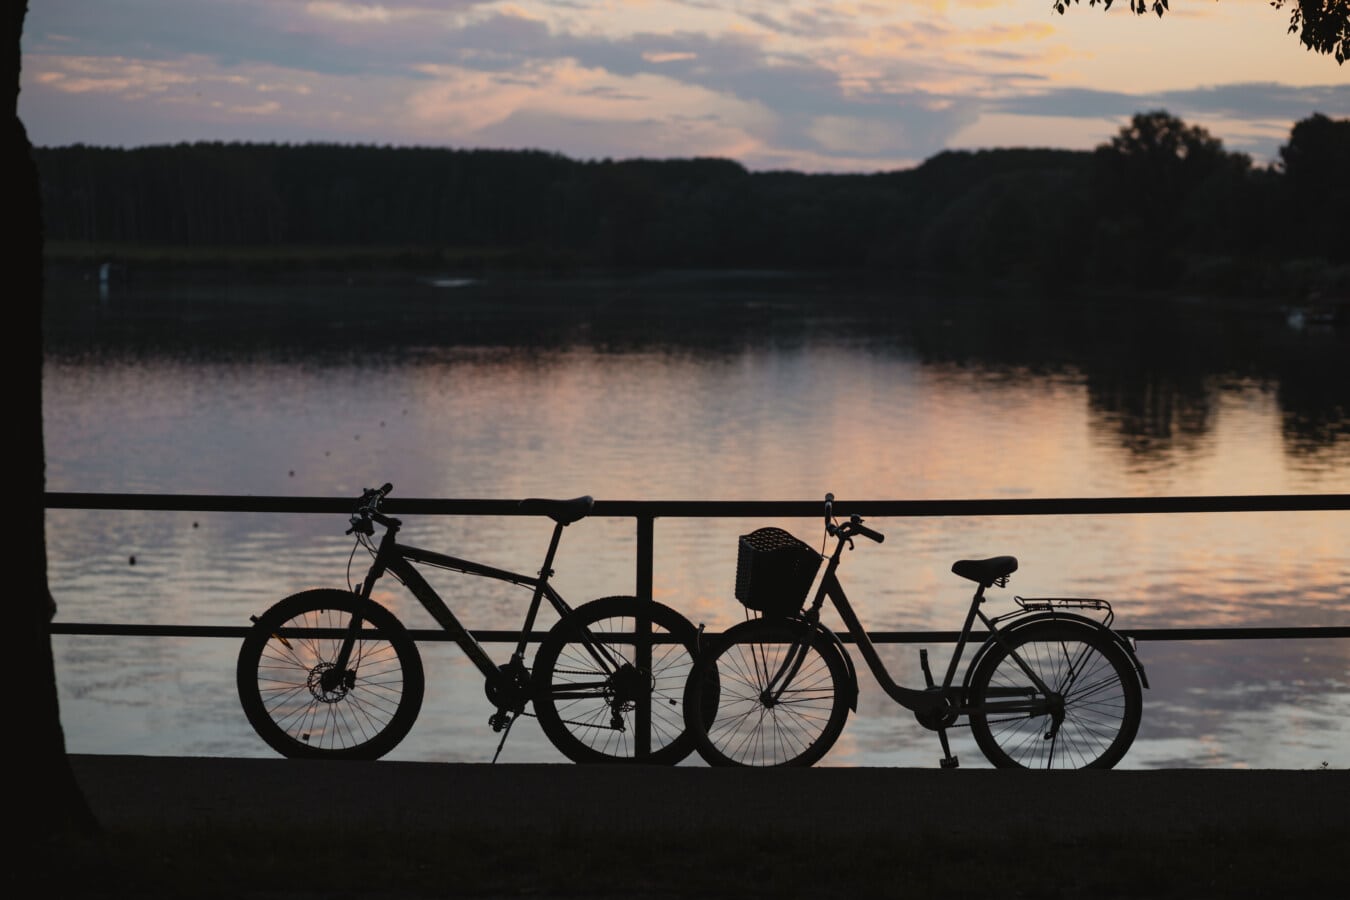 backlight, dusk, silhouette, bicycle, dawn, water, landscape, nature, outdoors, vehicle